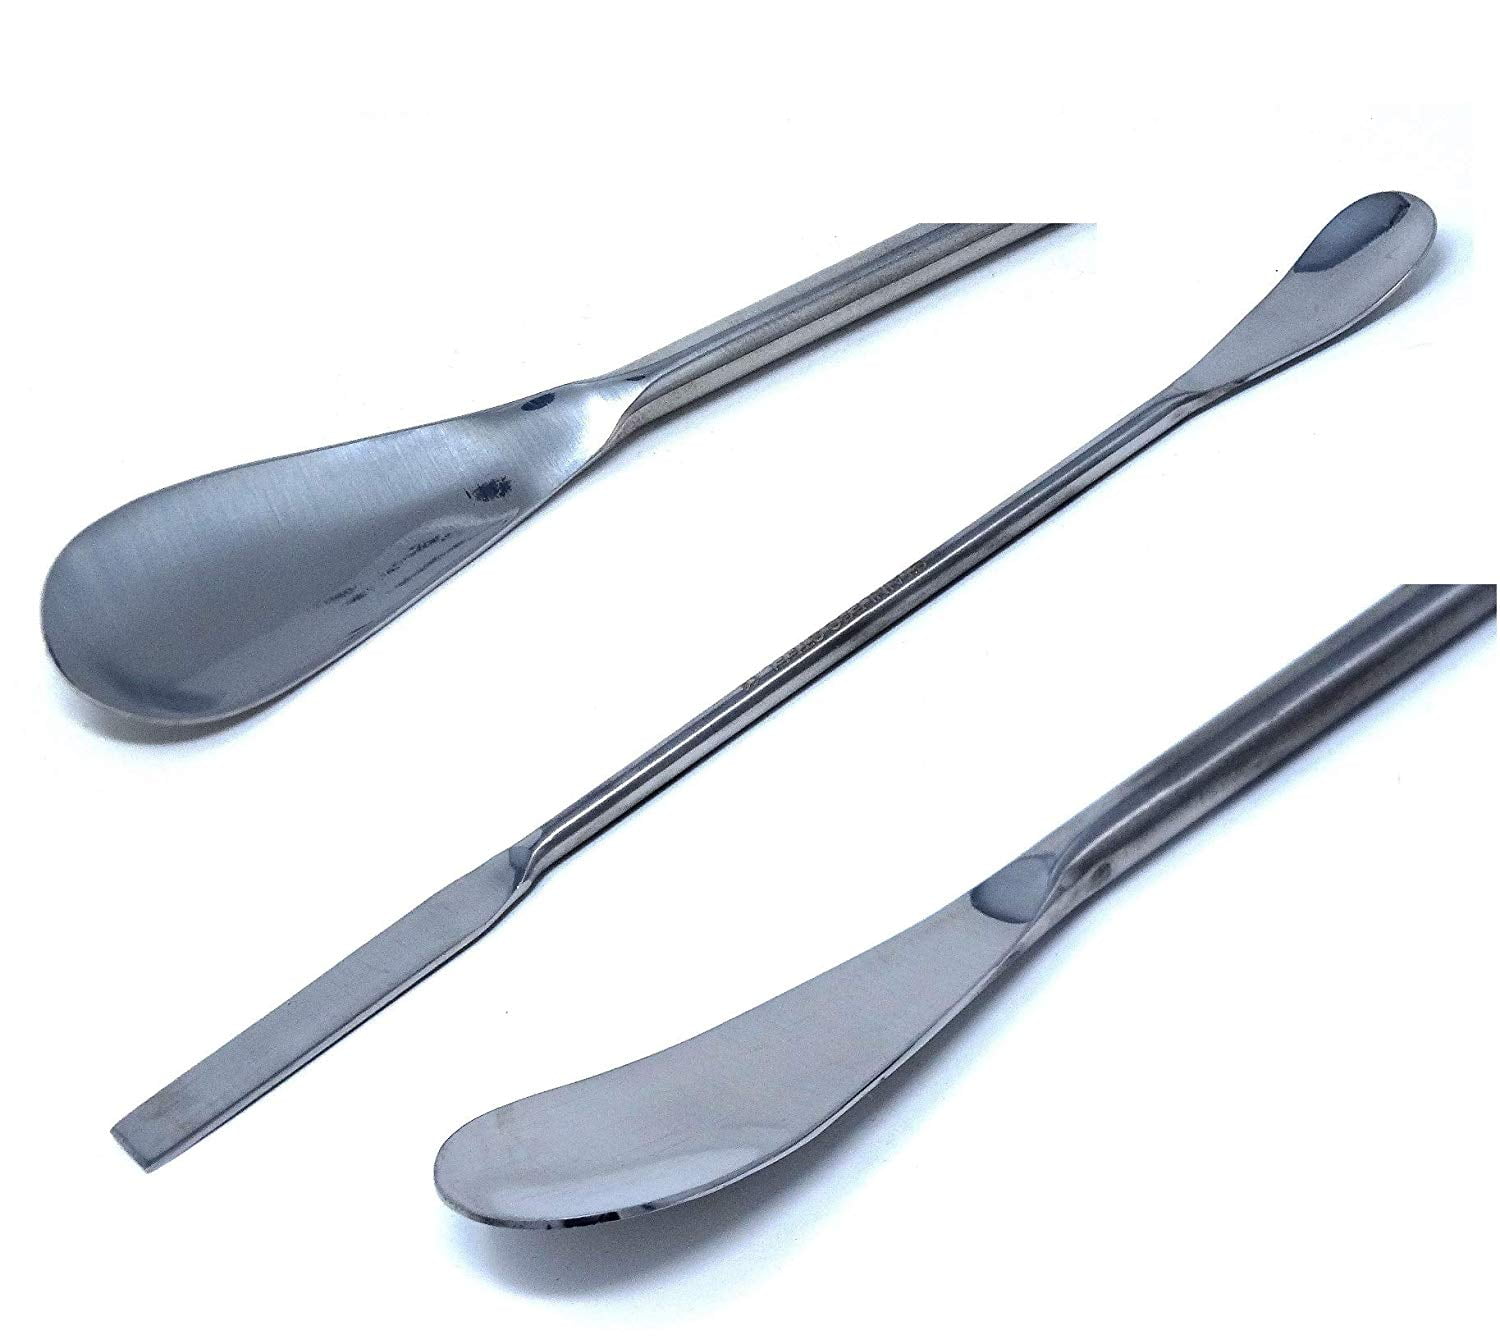 A2Z-PTSQSP7 PTFE Coated Stainless Steel Double Ended Micro Lab Spatula 7 Length Square & Flat Spoon End 